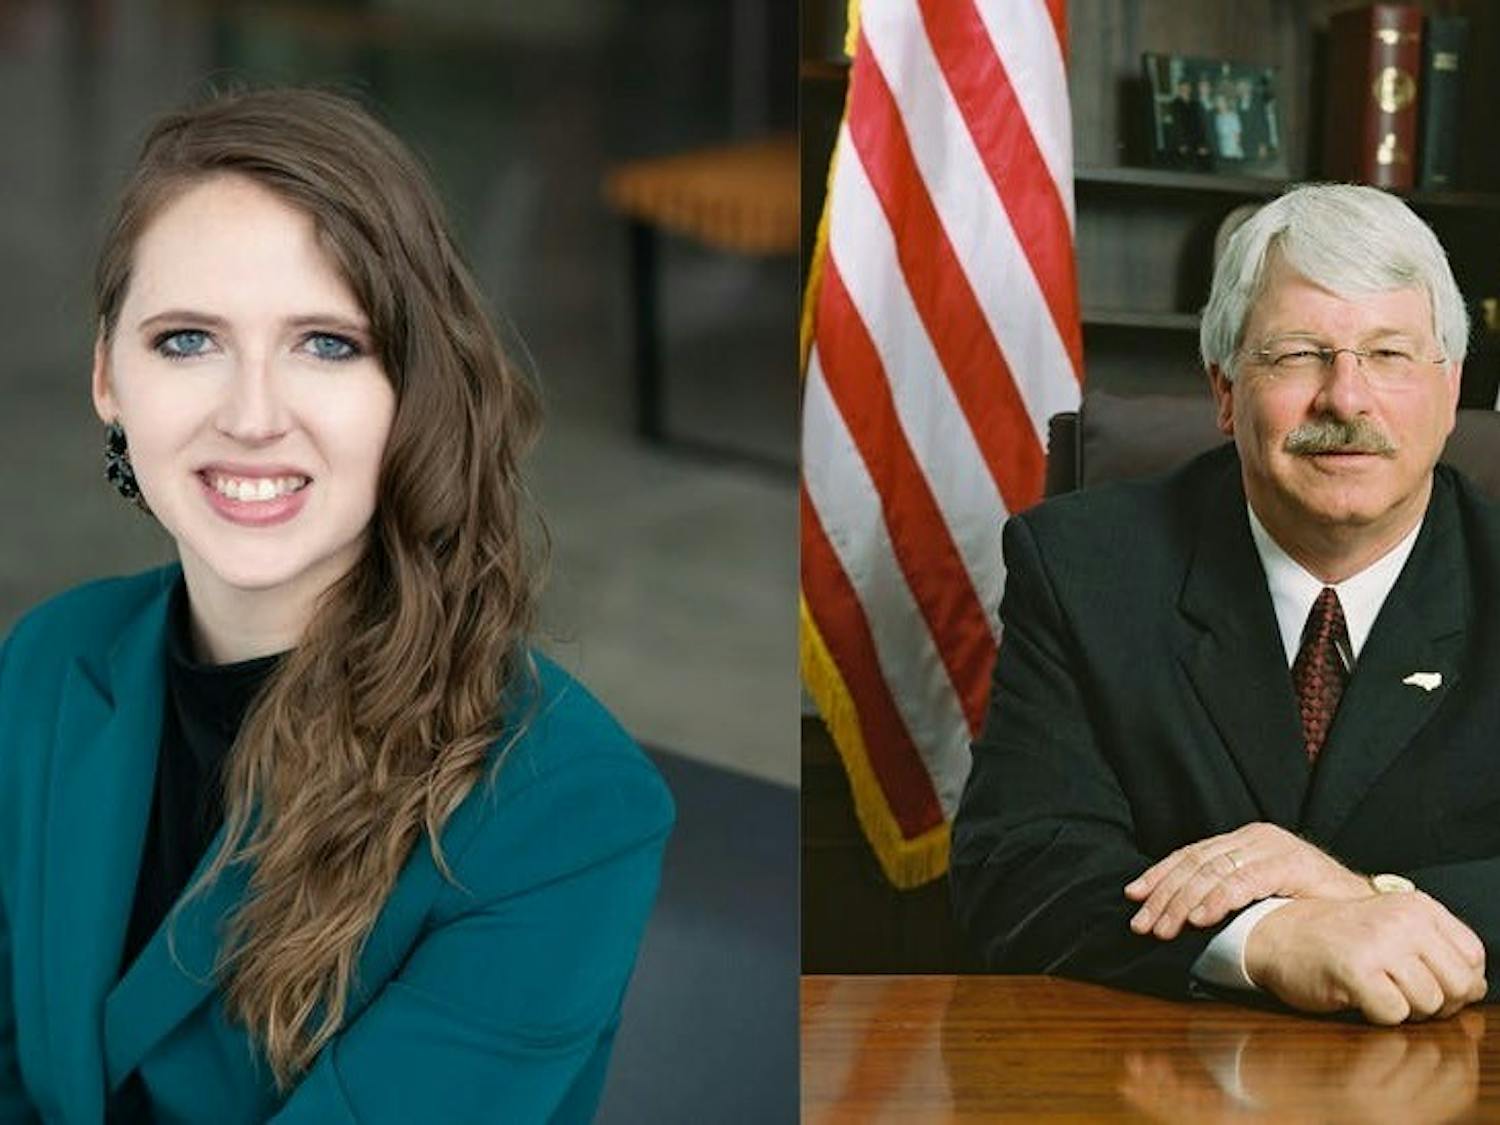 Democrat Jenna Wadsworth (left) and incumbent Republican Steve Troxler (right) are the candidates for N.C. Commissioner of Agriculture.